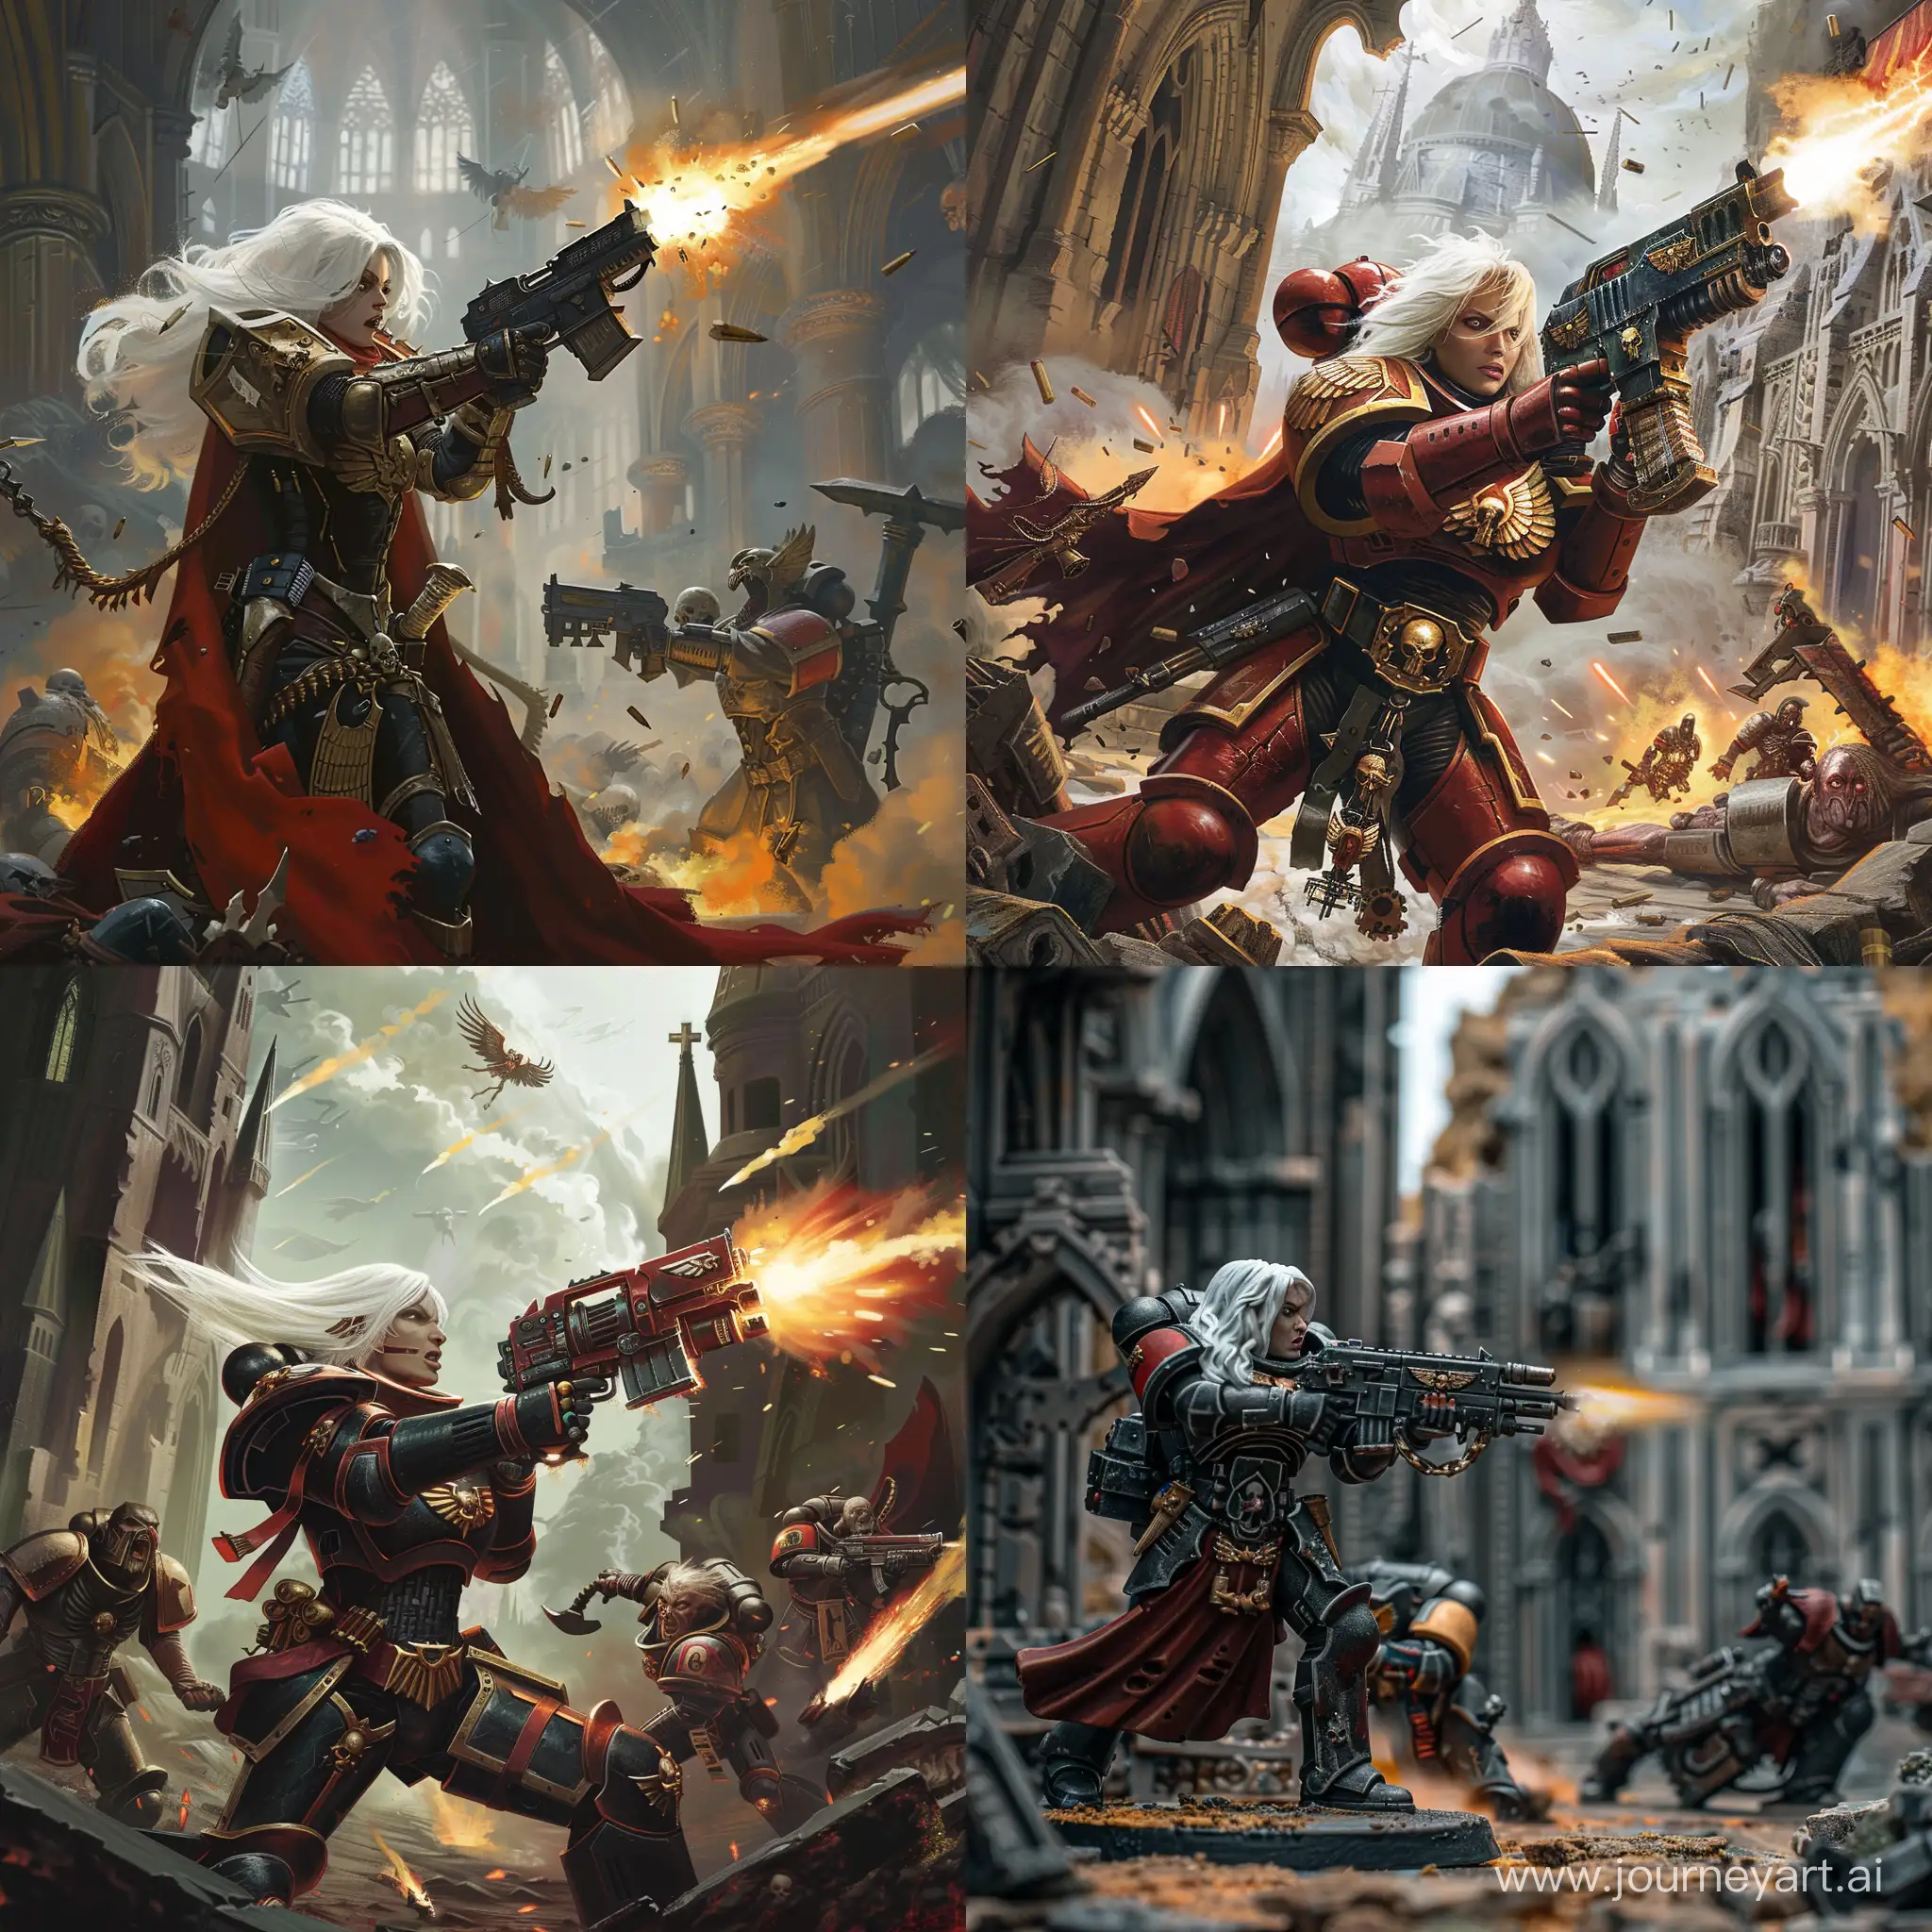 BattleReady-Adepta-Sororitas-Purging-Chaos-Cultists-in-Gothic-Cathedral-Ruins